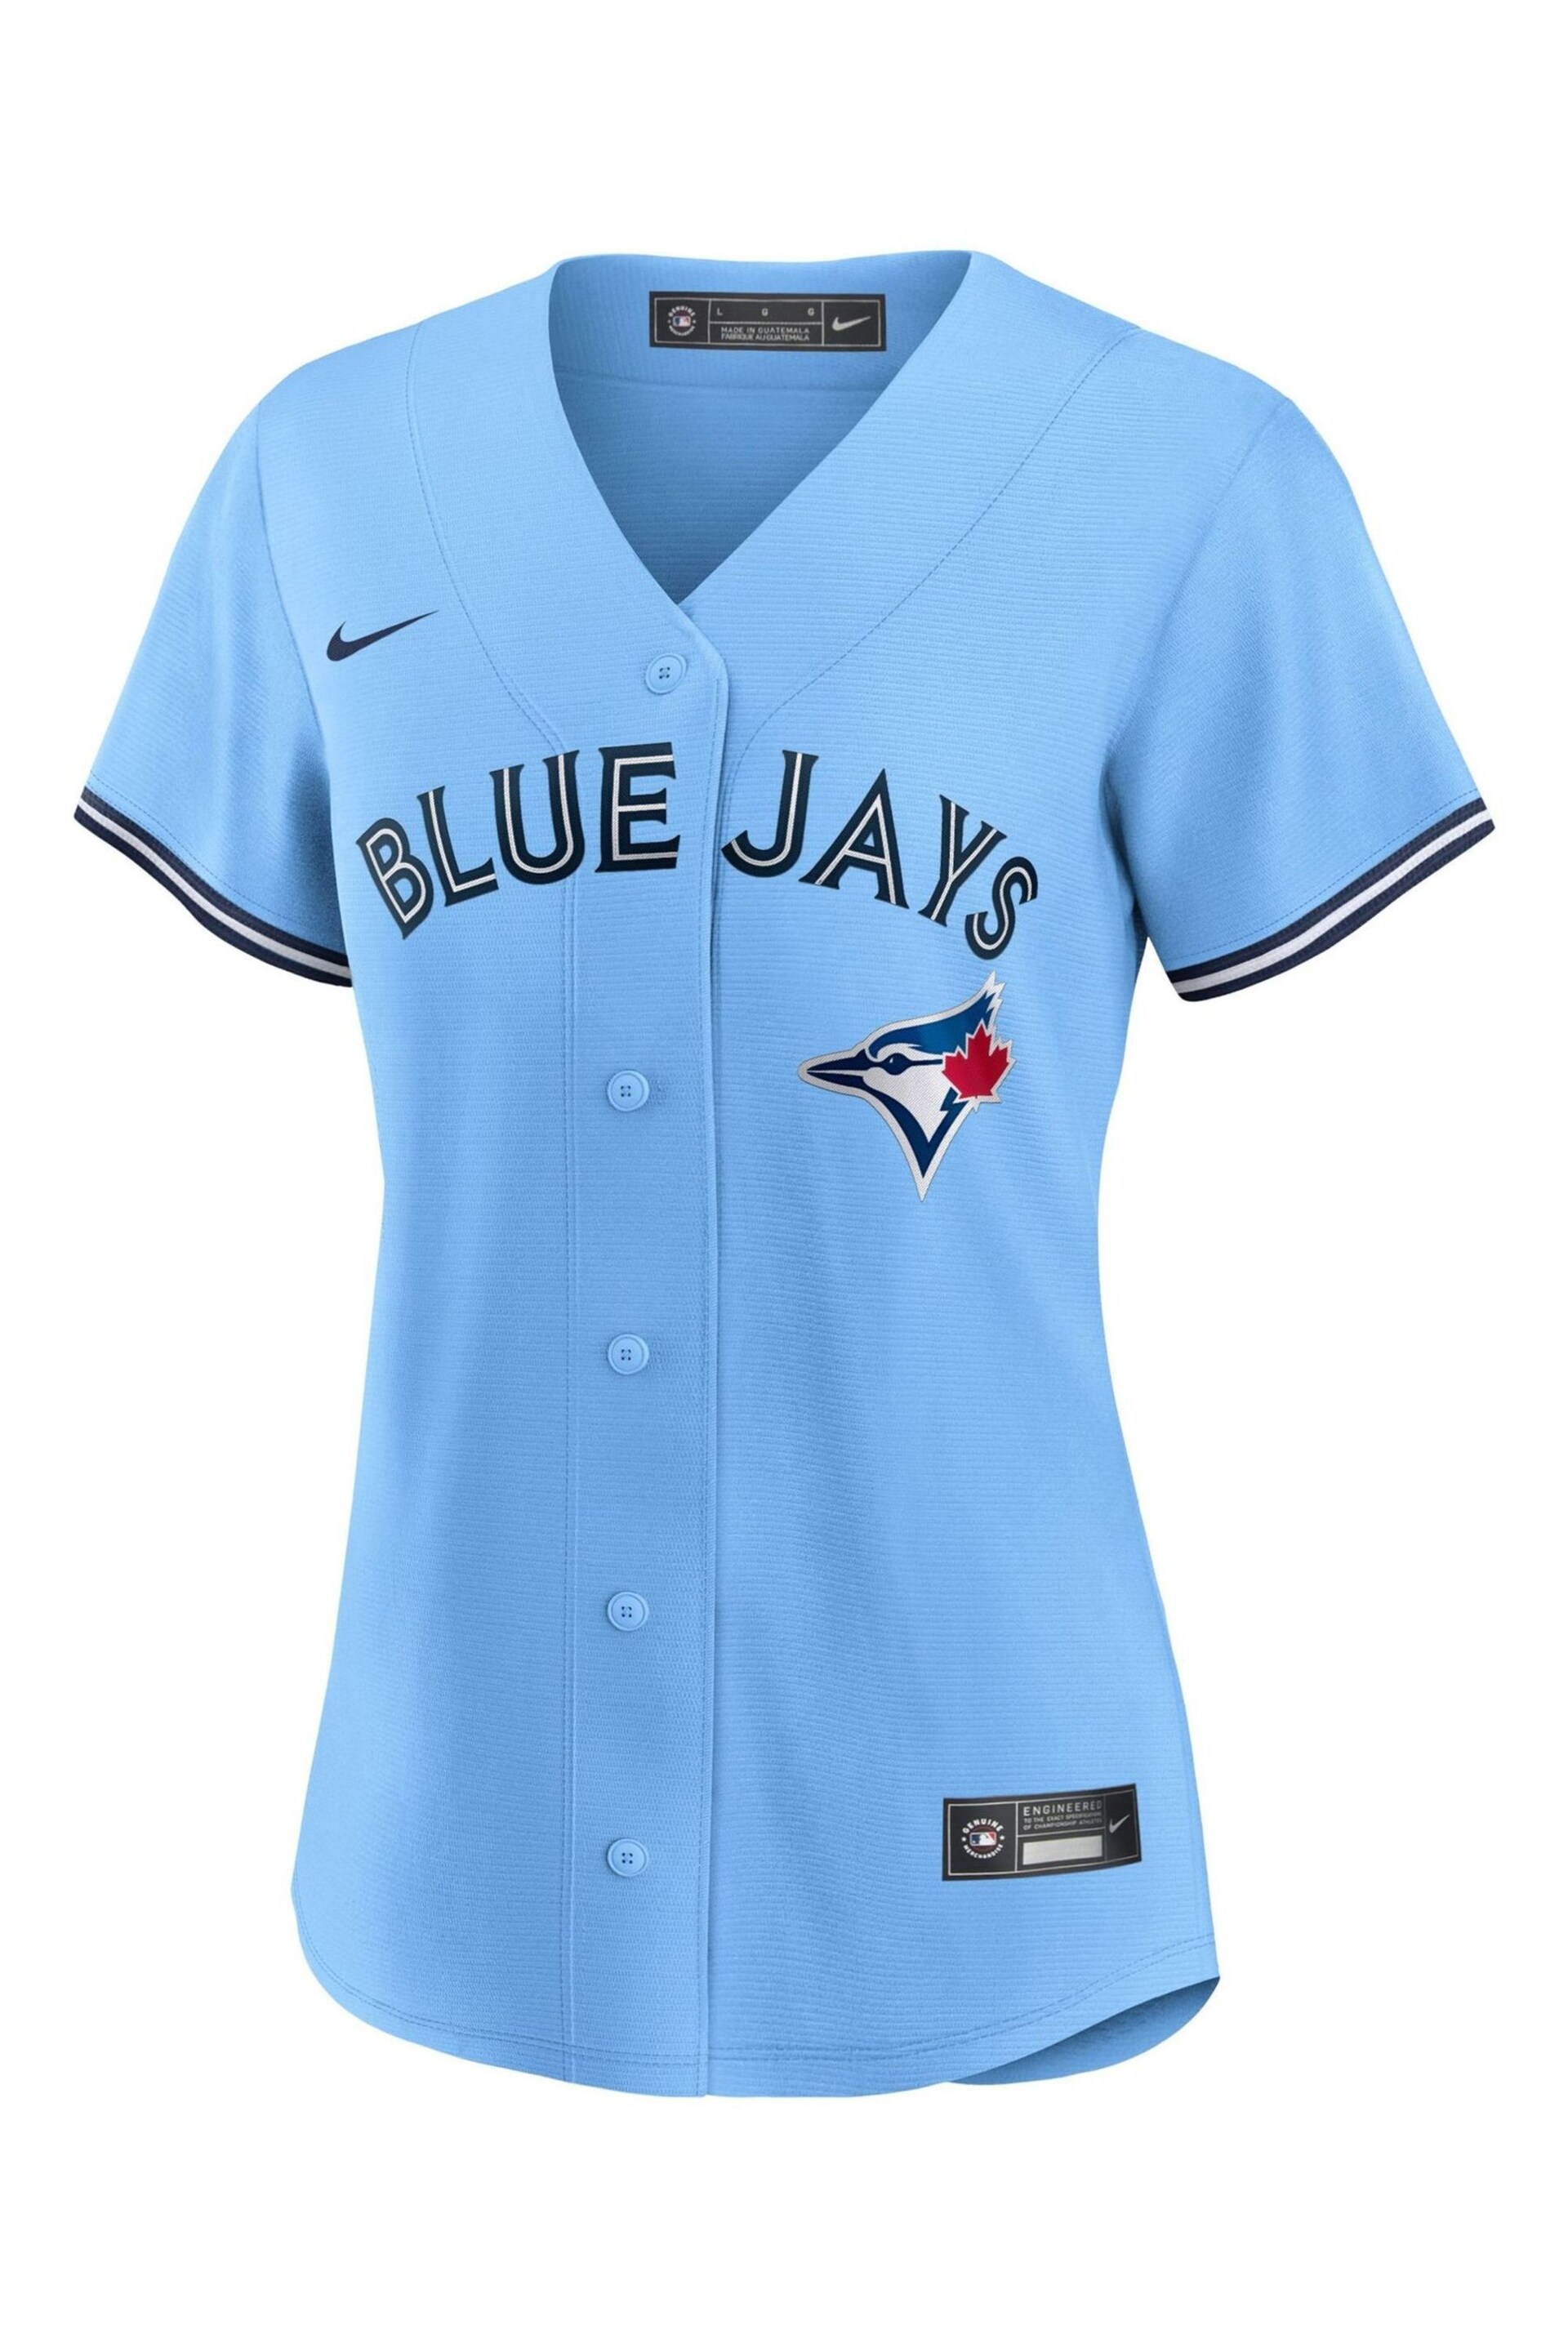 Nike Blue Toronto Jays Official Replica Alternate Road Jersey Womens - Image 2 of 3